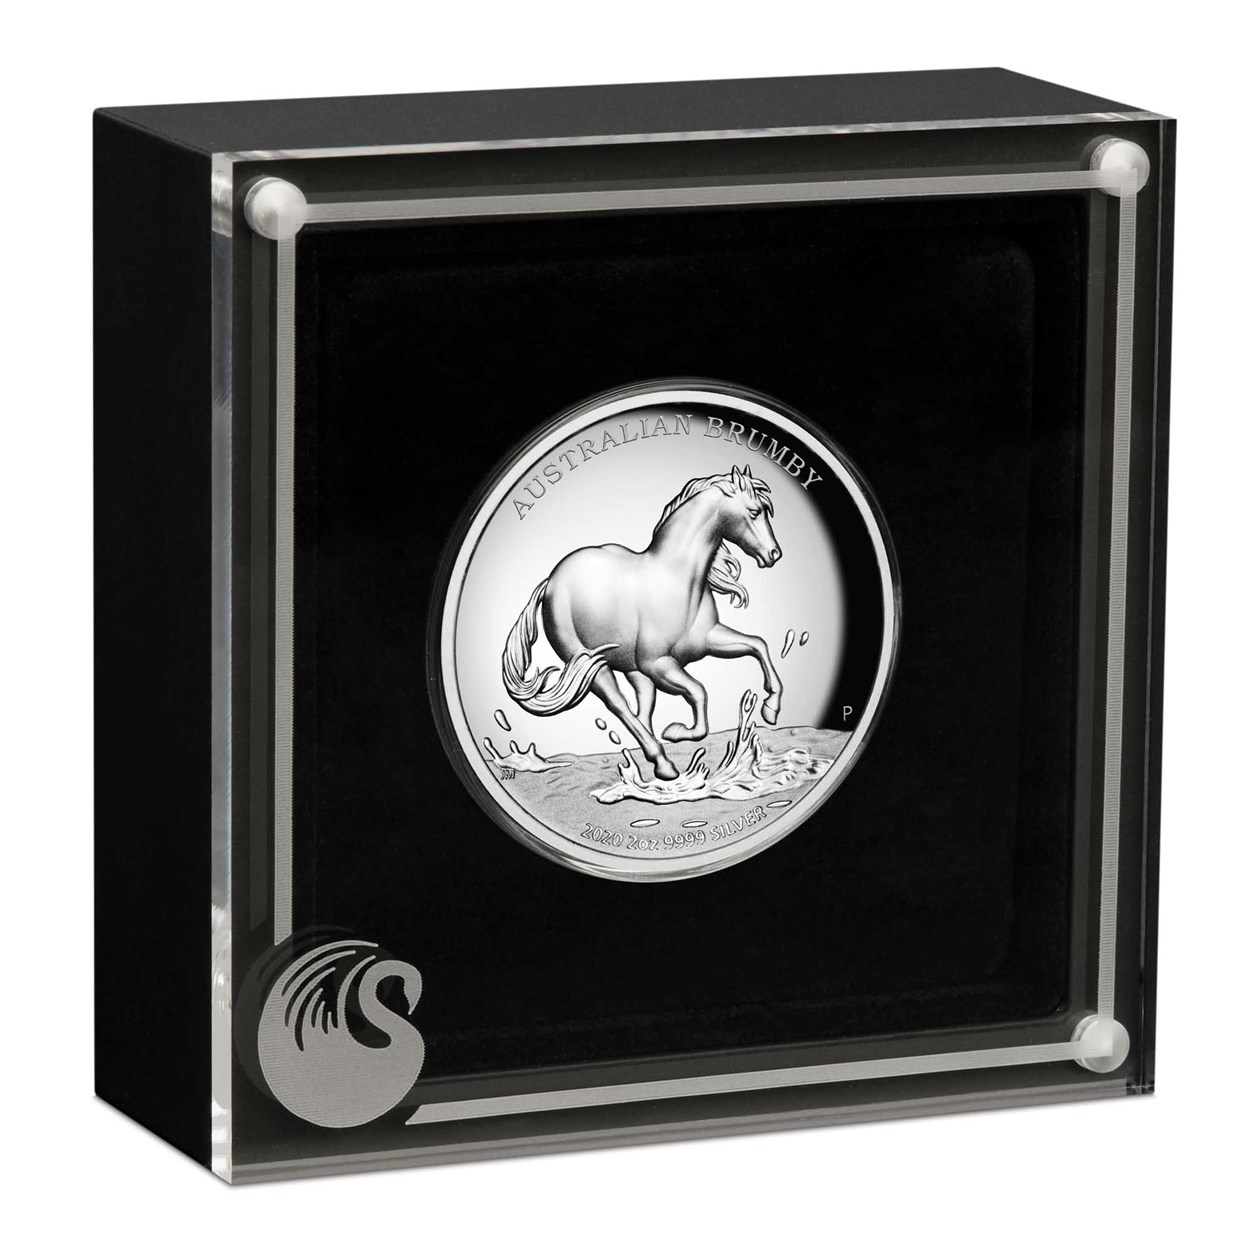 04 2020 AustralianBrumby 2oz Silver Proof HighRelief Coin InCase HighRes